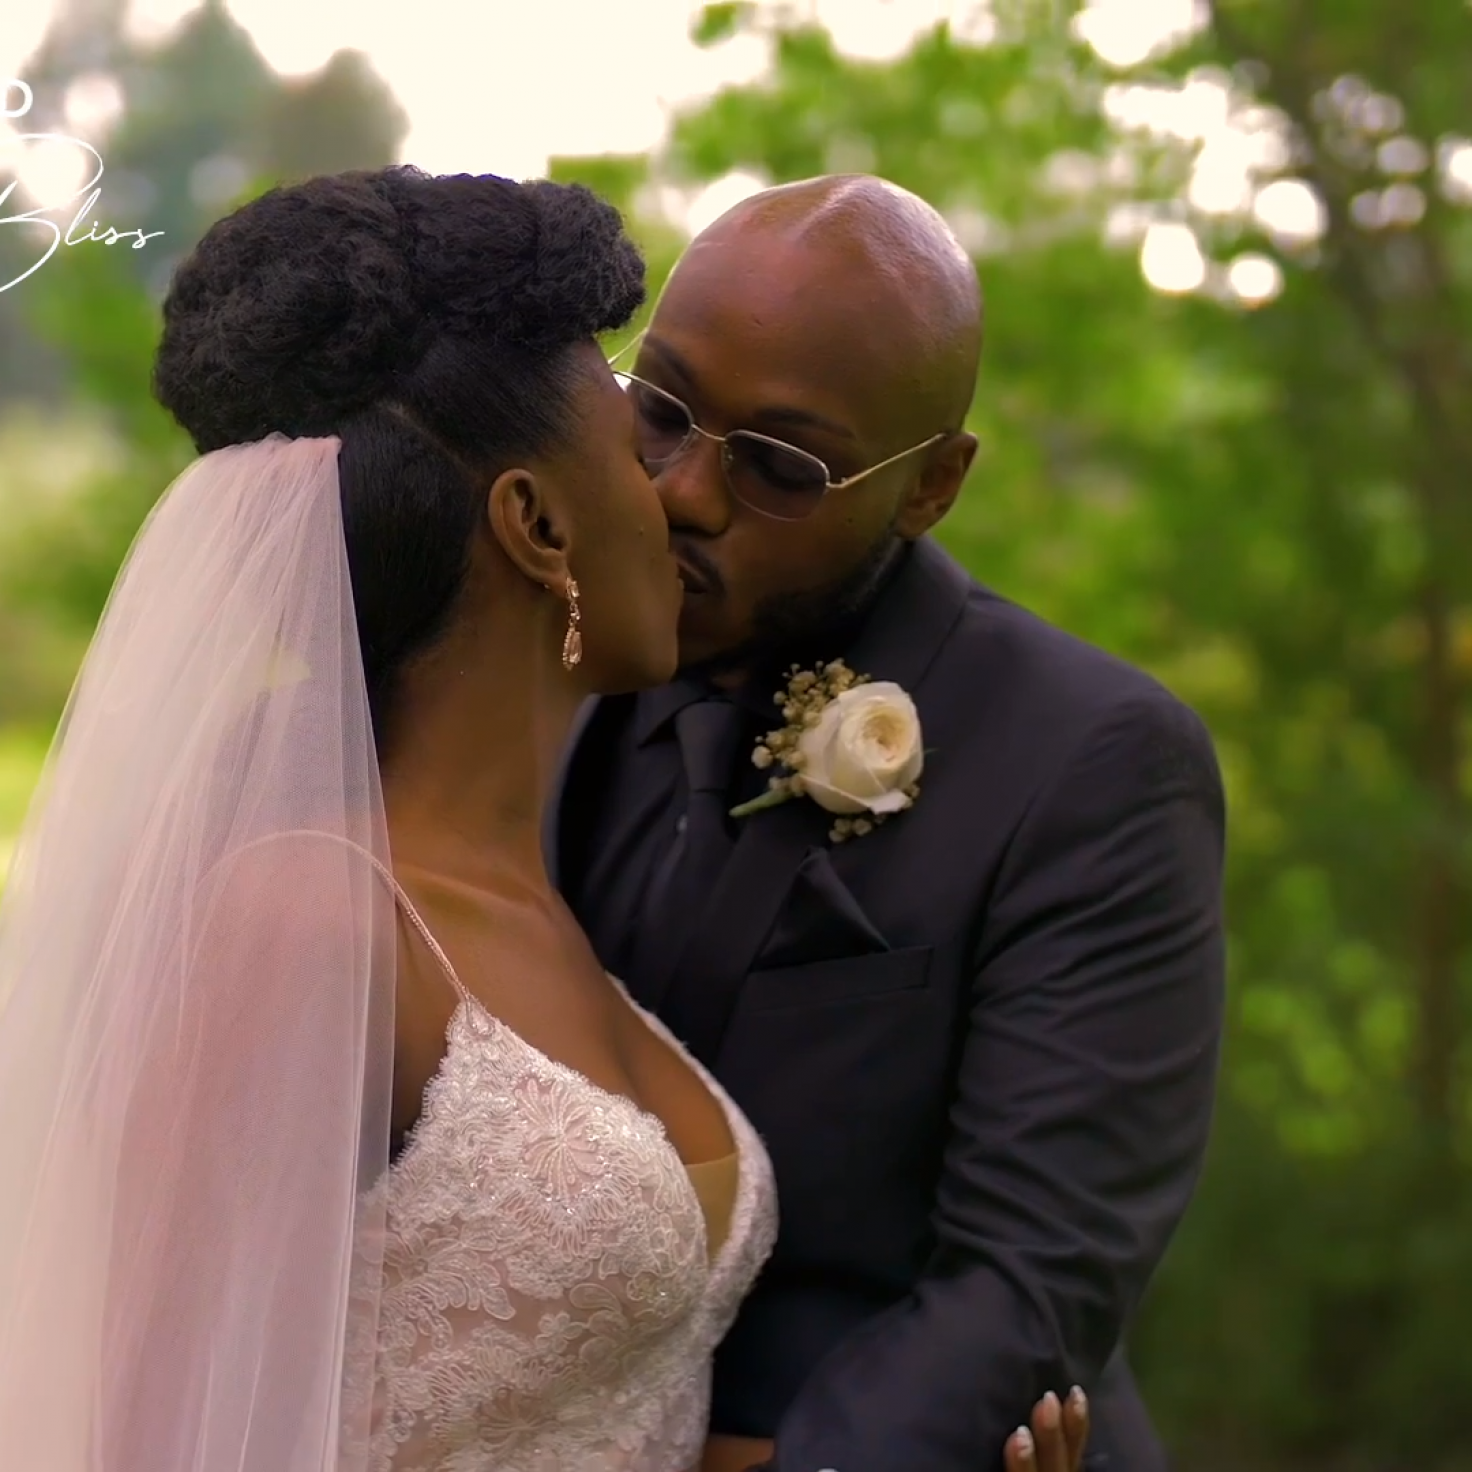 Watch Behind Bridal Bliss: The Groom Took The Bride's Last Name To Keep A Legacy Alive